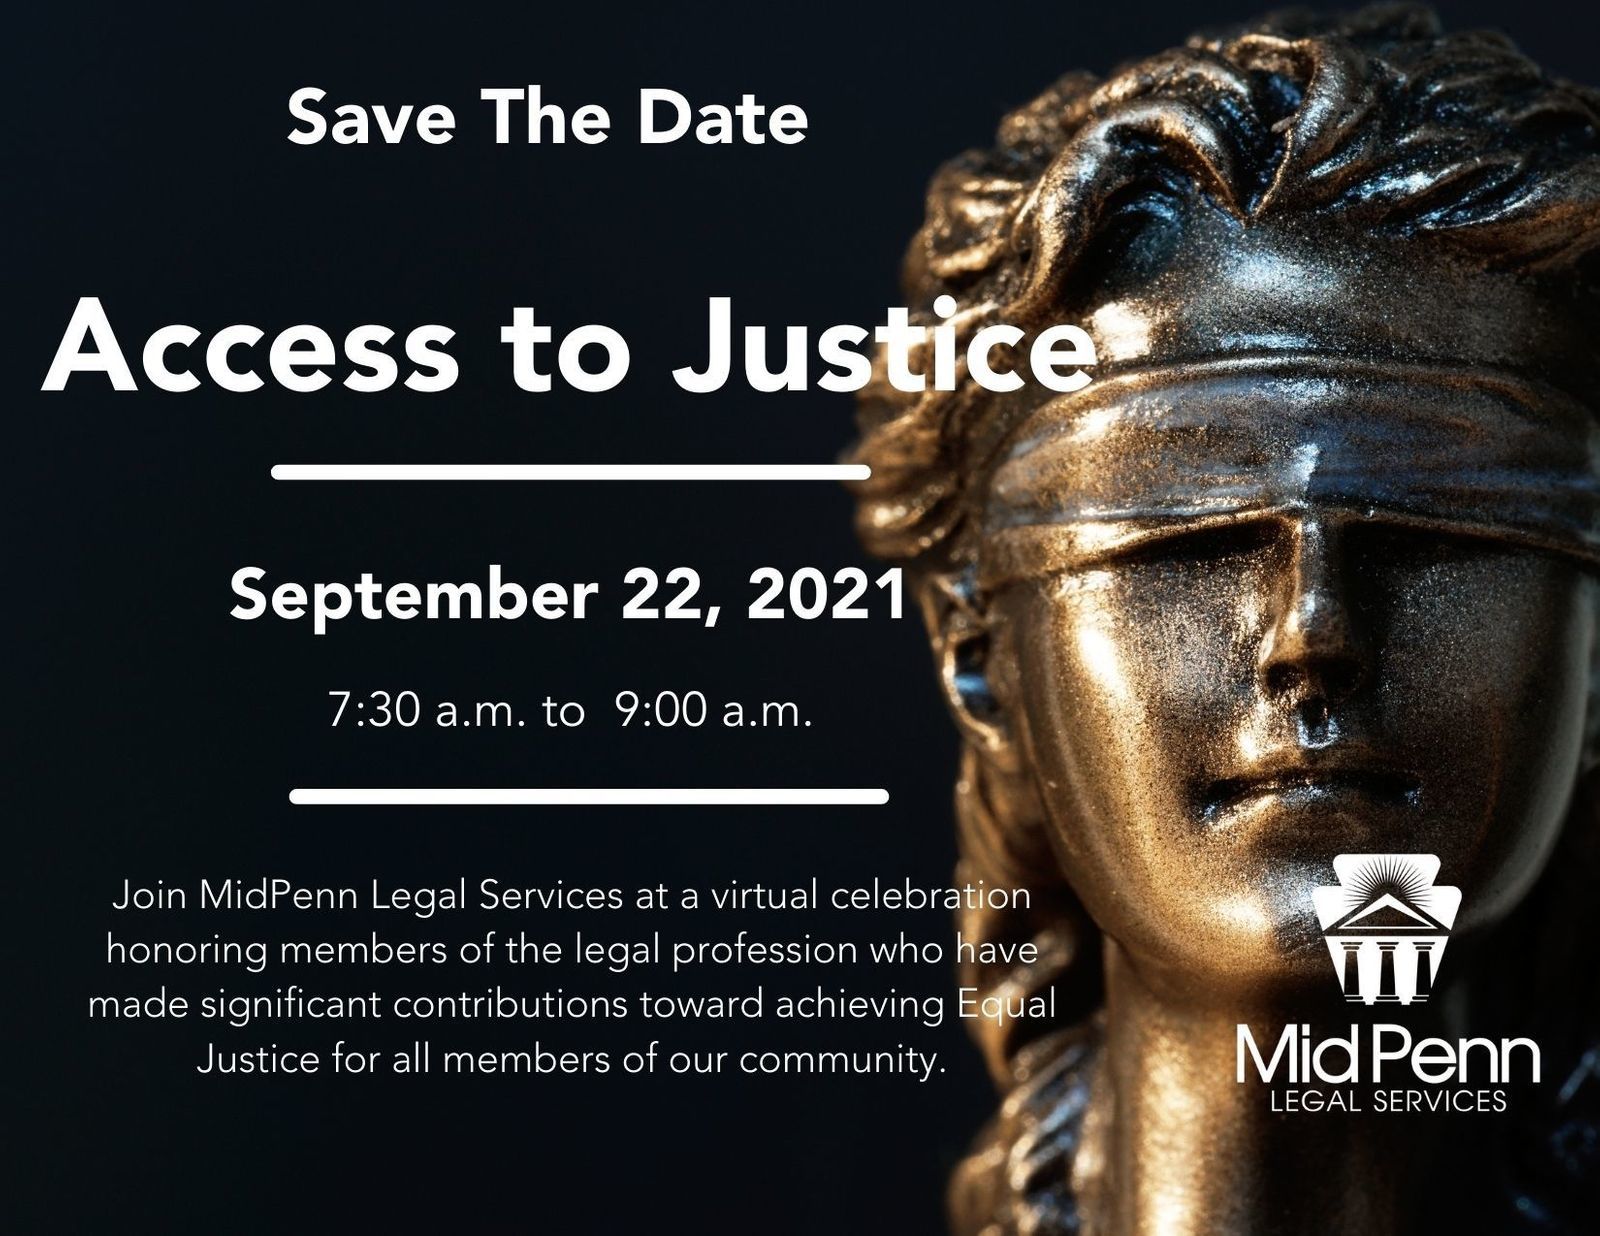 Join MidPenn Legal Services at a virtual celebration honoring members of the legal profession who have made significant contributions toward achieving Equal Justice for all members of our community. Sept. 22, 2021, 7:30am-9:00am..